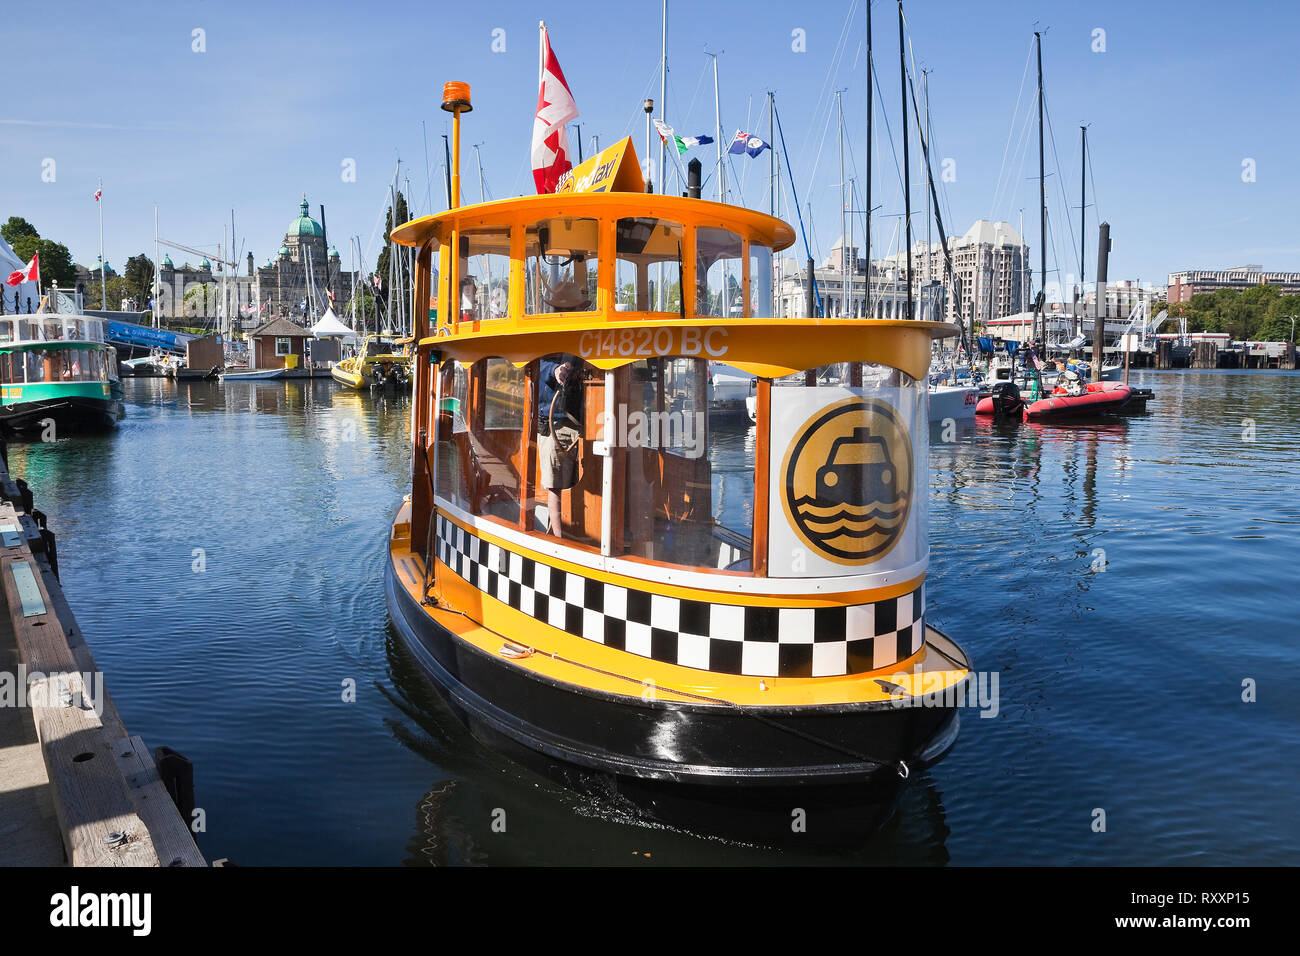 Borrowing from the style of New York City's iconic cabs, H2O Taxi is operated by the Victoria Harbour Ferry company and ferries passengers to a dozen stops in Victoria's Inner Harbour, Victoria, British Columbia, Canada Stock Photo